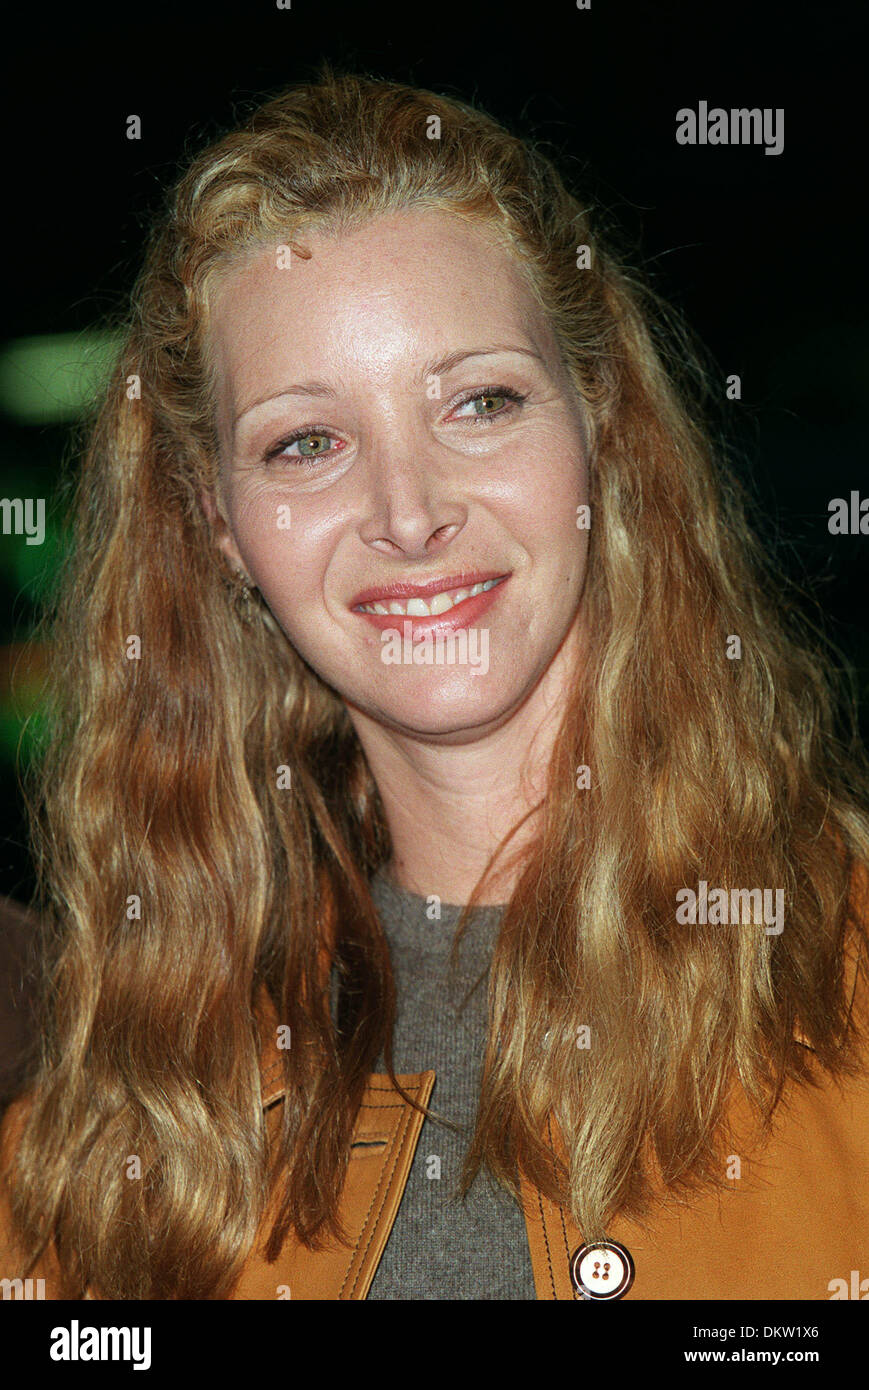 LISA KUDROW ACTRICE.''Amis''.HOLLYWOOD, LOS ANGELES, USA.20/02/2001.BF53B24 Banque D'Images